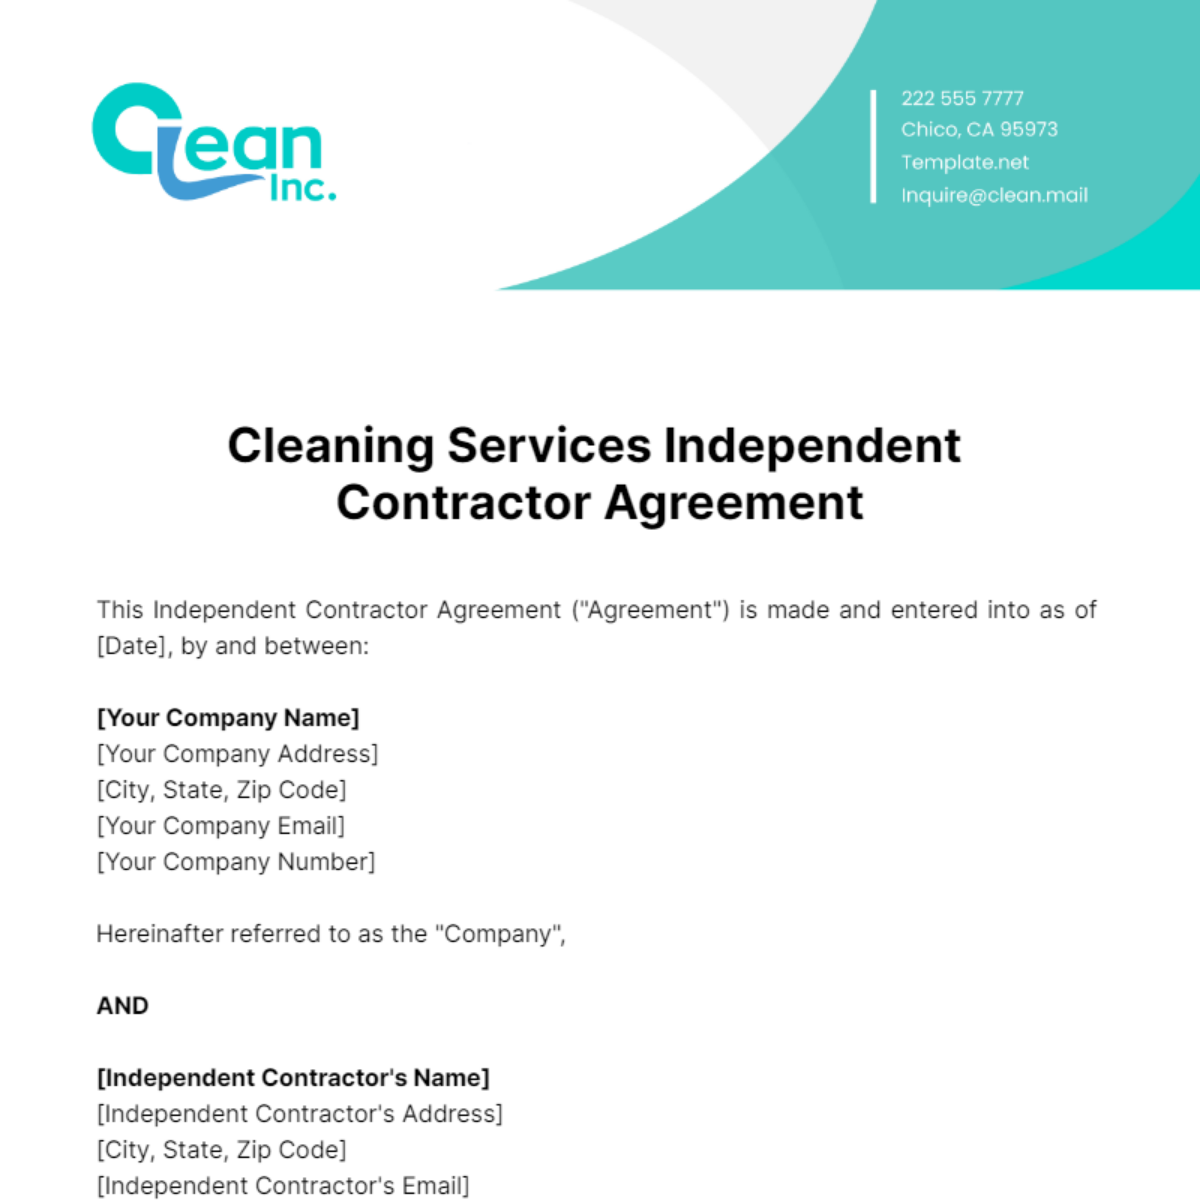 Cleaning Services Independent Contractor Agreement Template